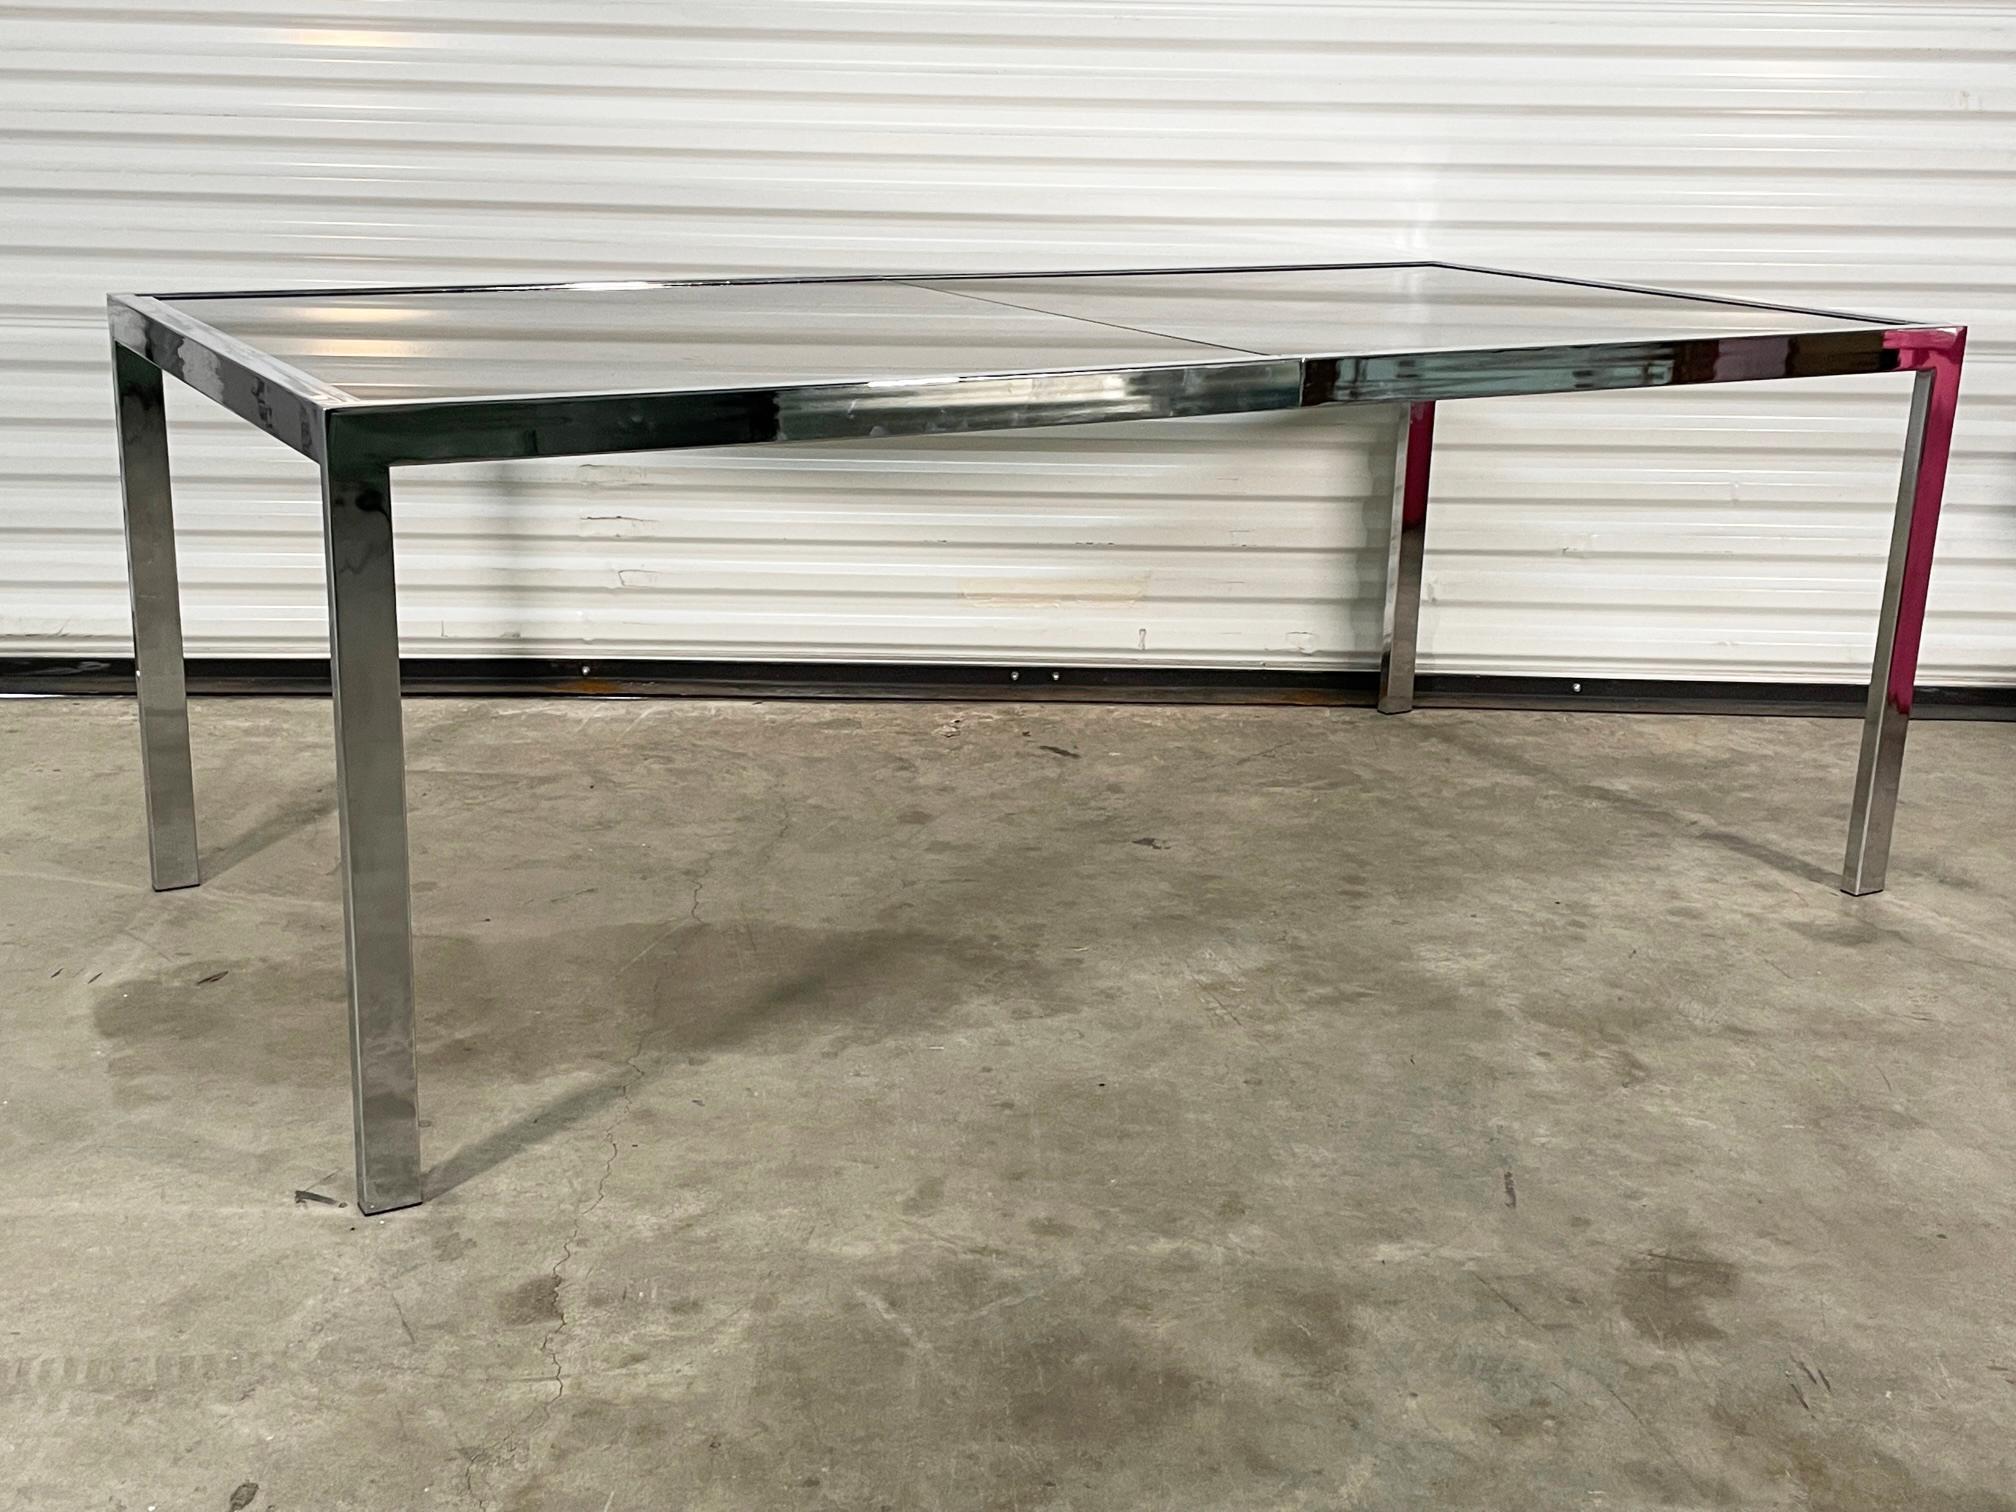 Midcentury chrome dining table by Milo Baughman for Design Institute of America features smoked glass and expands to 96